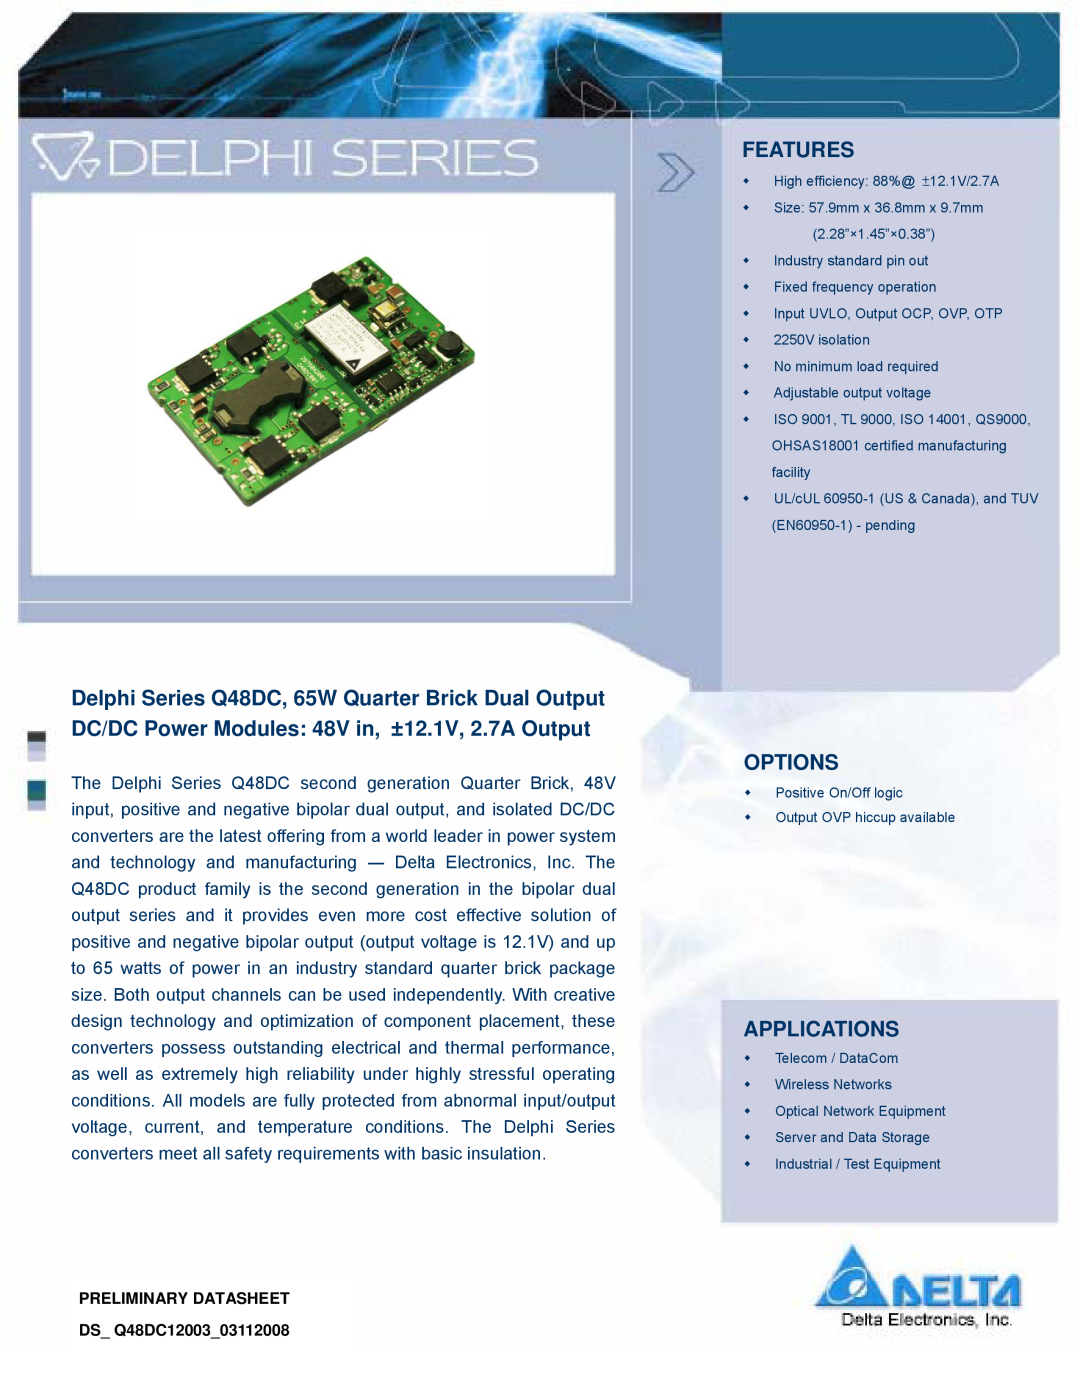 Delta Electronics manual Features, Options, Applications, PRELIMINARY DATASHEET DS Q48DC1200303112008 